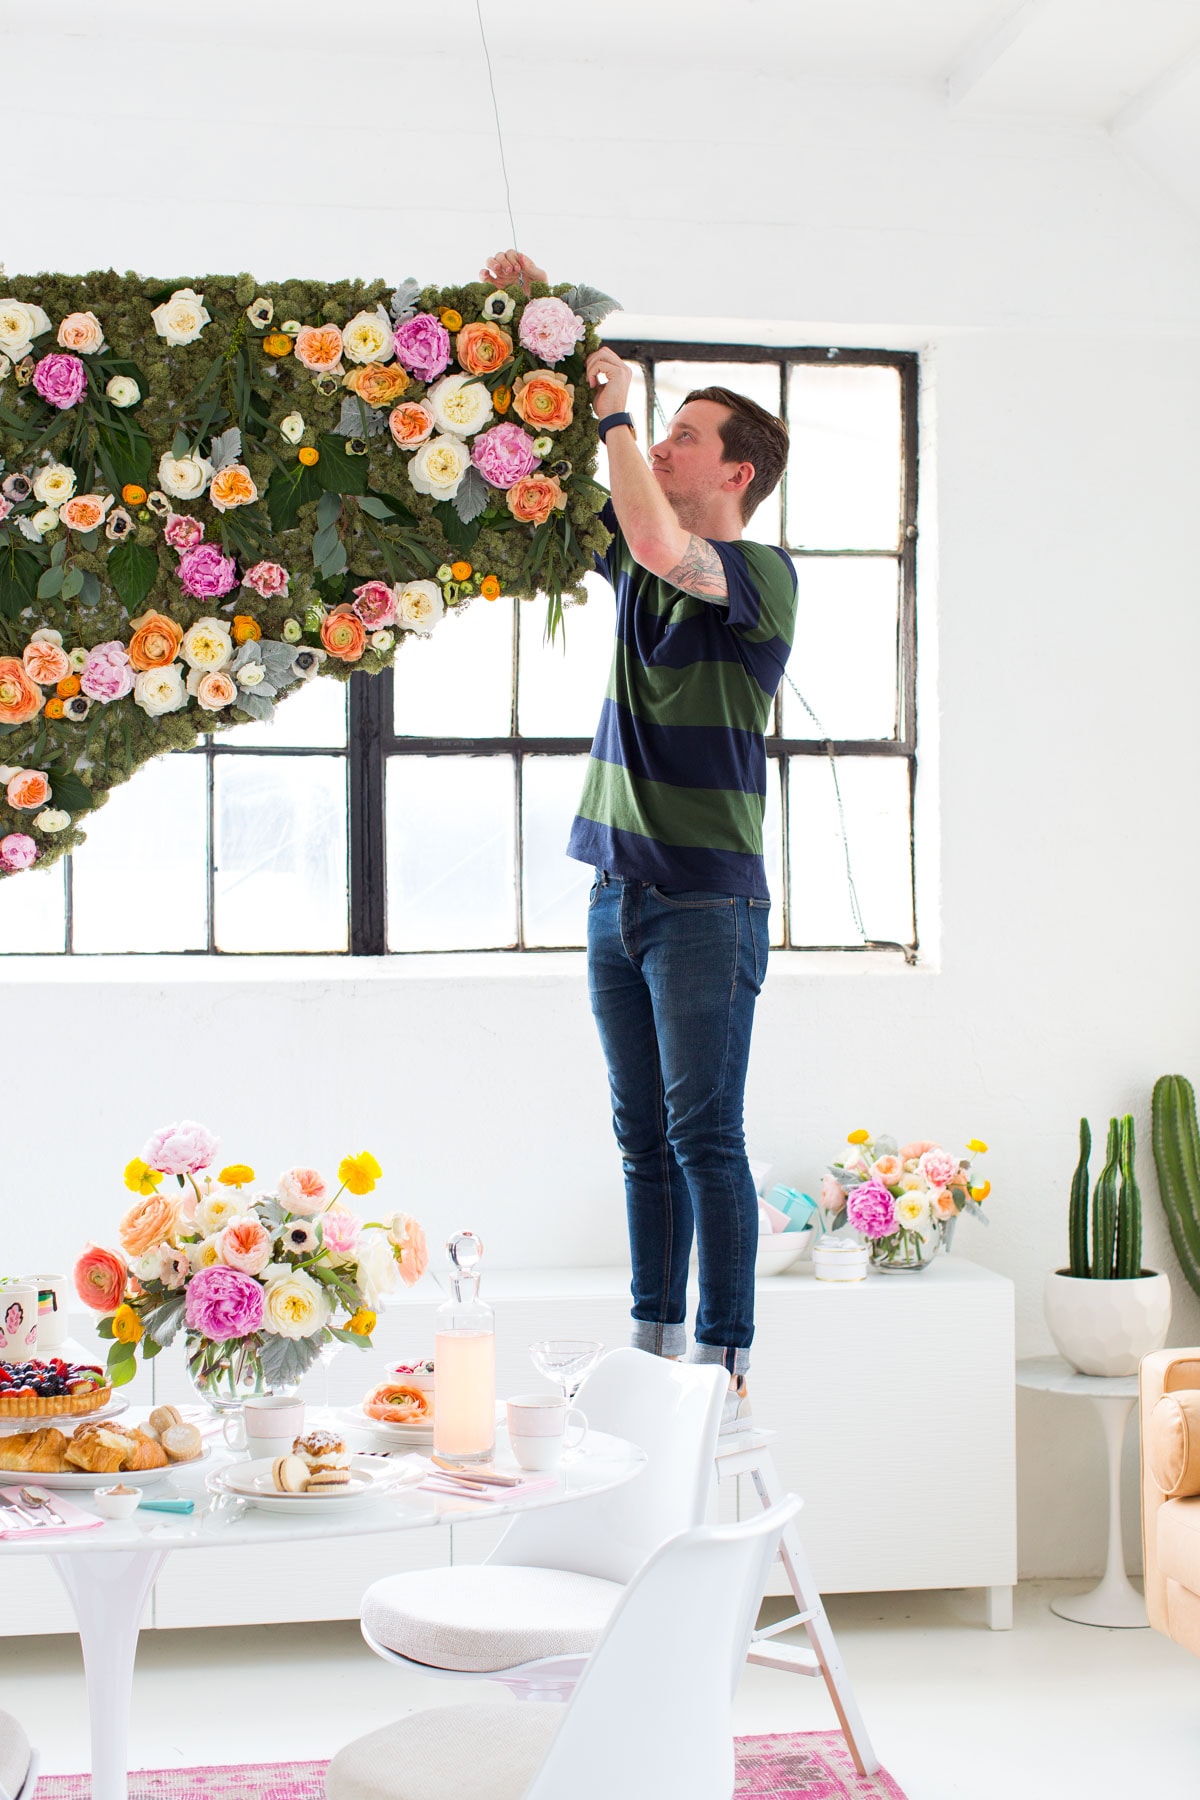 DIY Hanging Flower Wall Installation by Top Houston Lifestyle Blogger Ashley Rose of Sugar & Cloth | #diy #flowerwall #wallhanging #flower #floral #diydecor #backdrop 